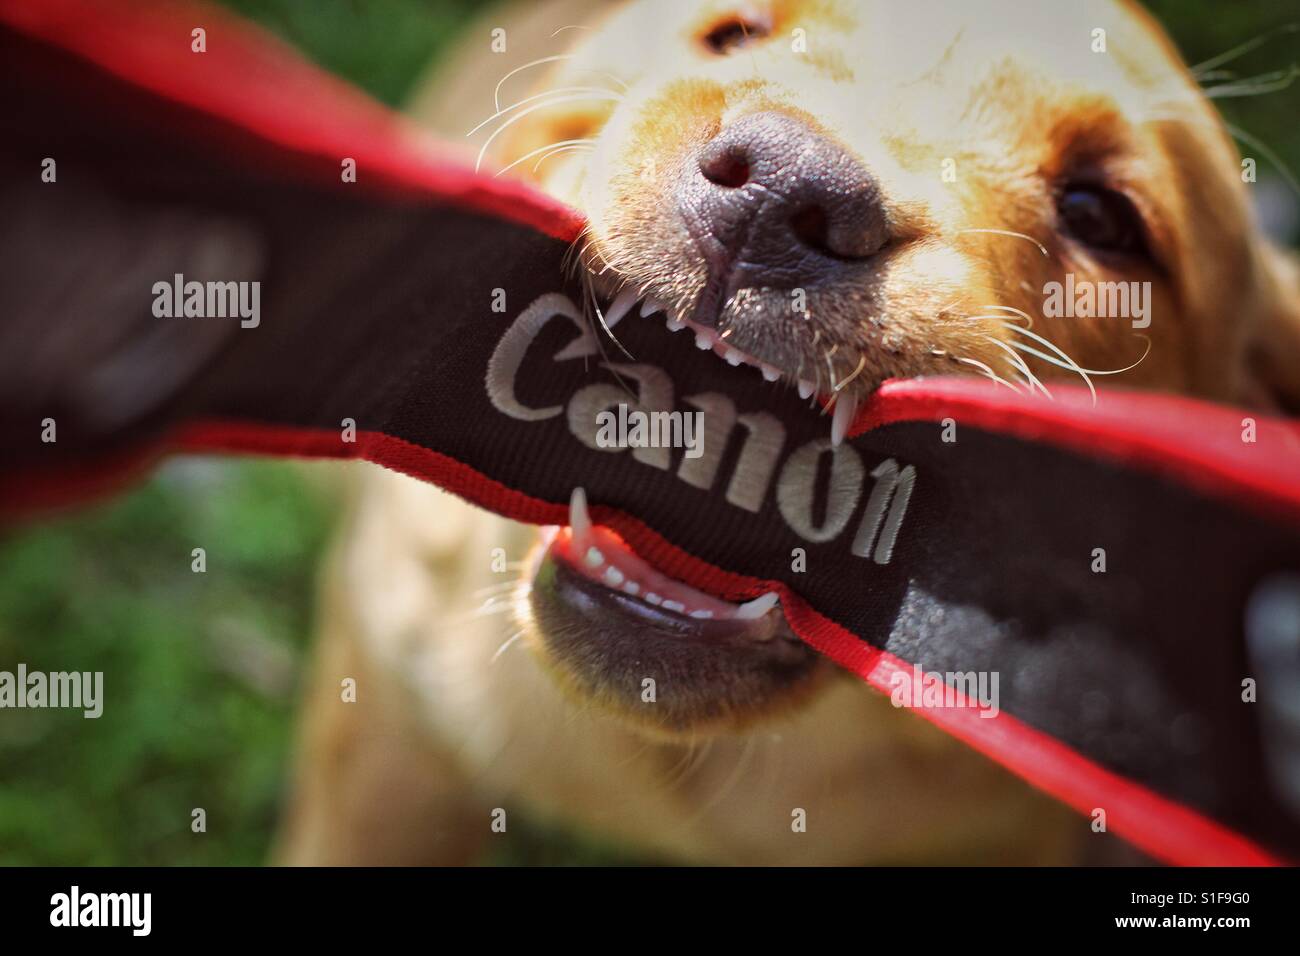 A fierce dog biting and chewing the camera strap of a photographer's Canon camera whilst he is taking a picture and causing damage and a property insurance claim. Stock Photo